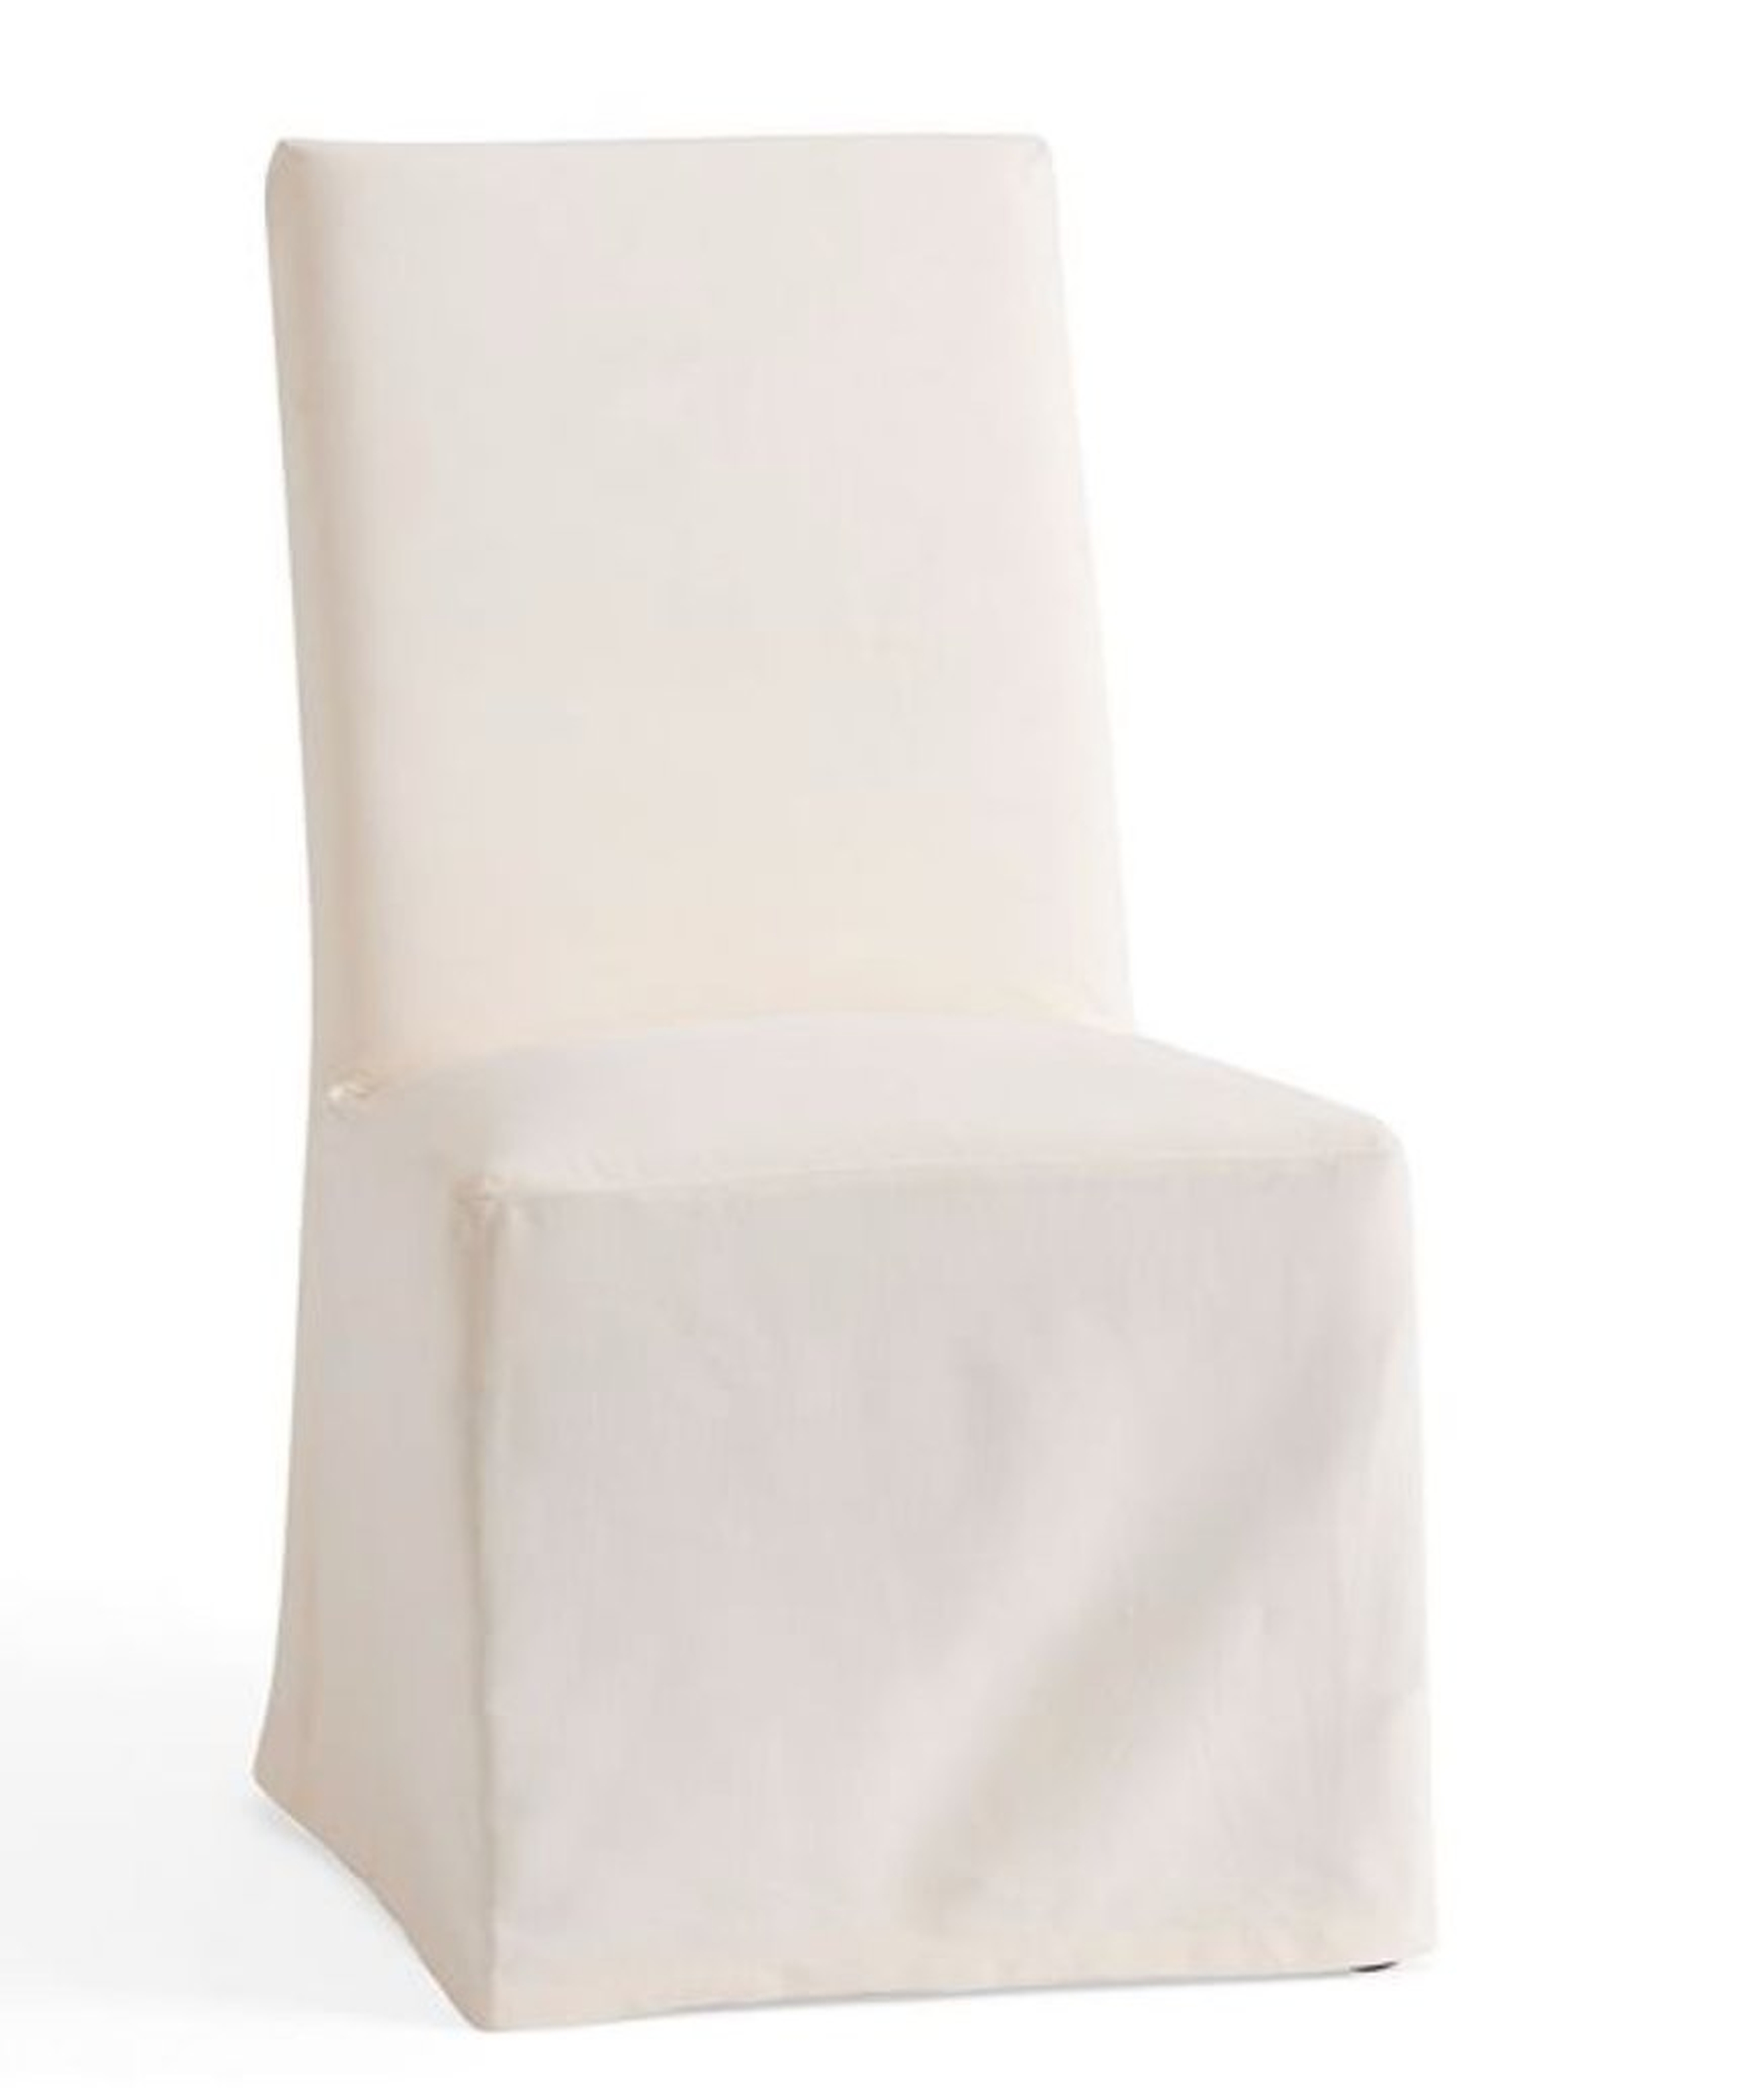 PB Comfort Square Slipcovered Dining Chair - Pottery Barn